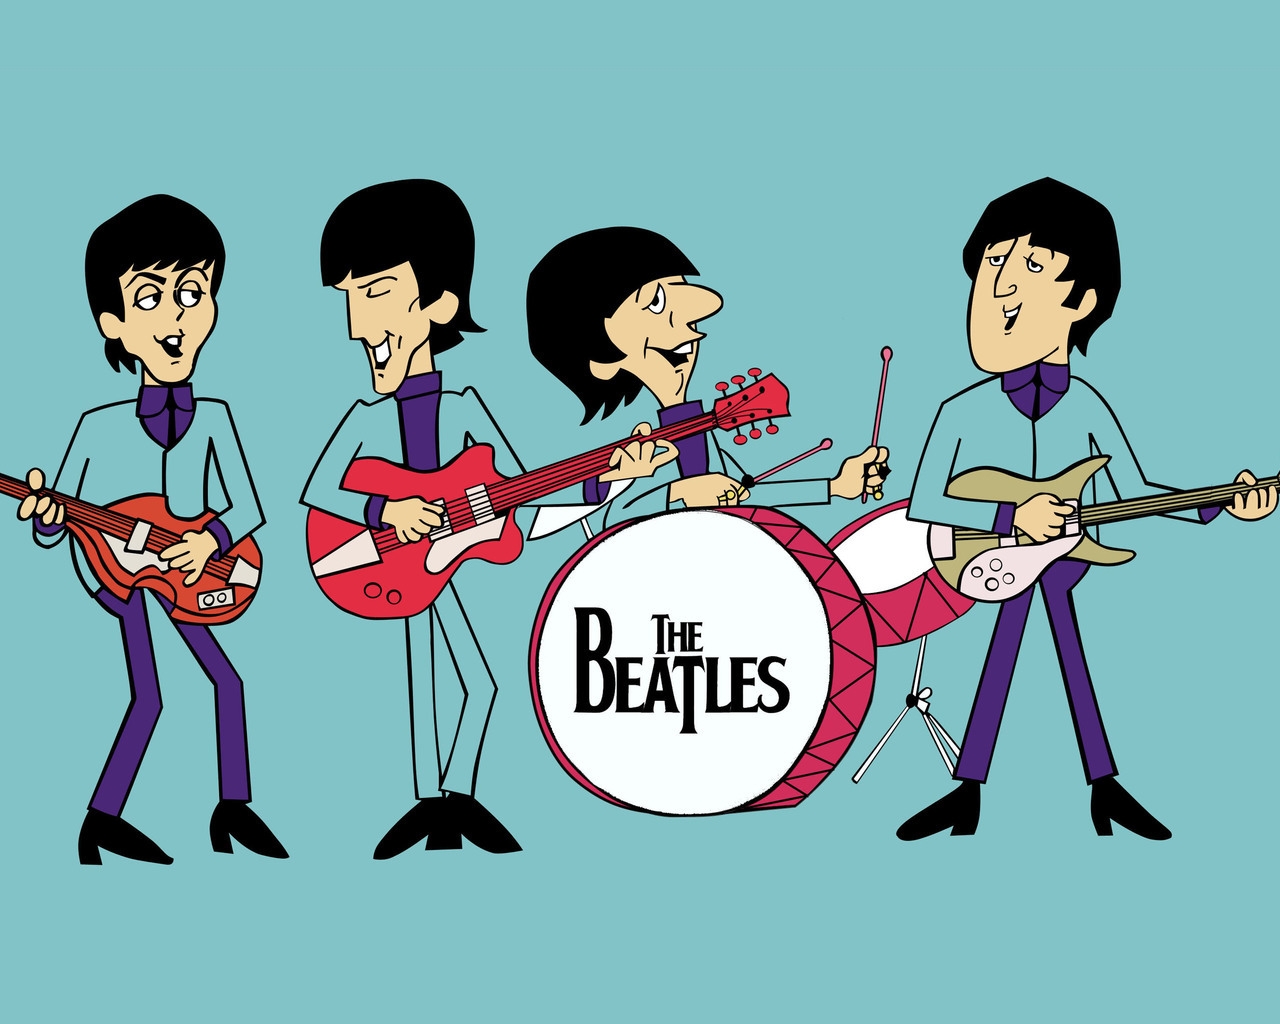 The Beatles Comics for 1280 x 1024 resolution